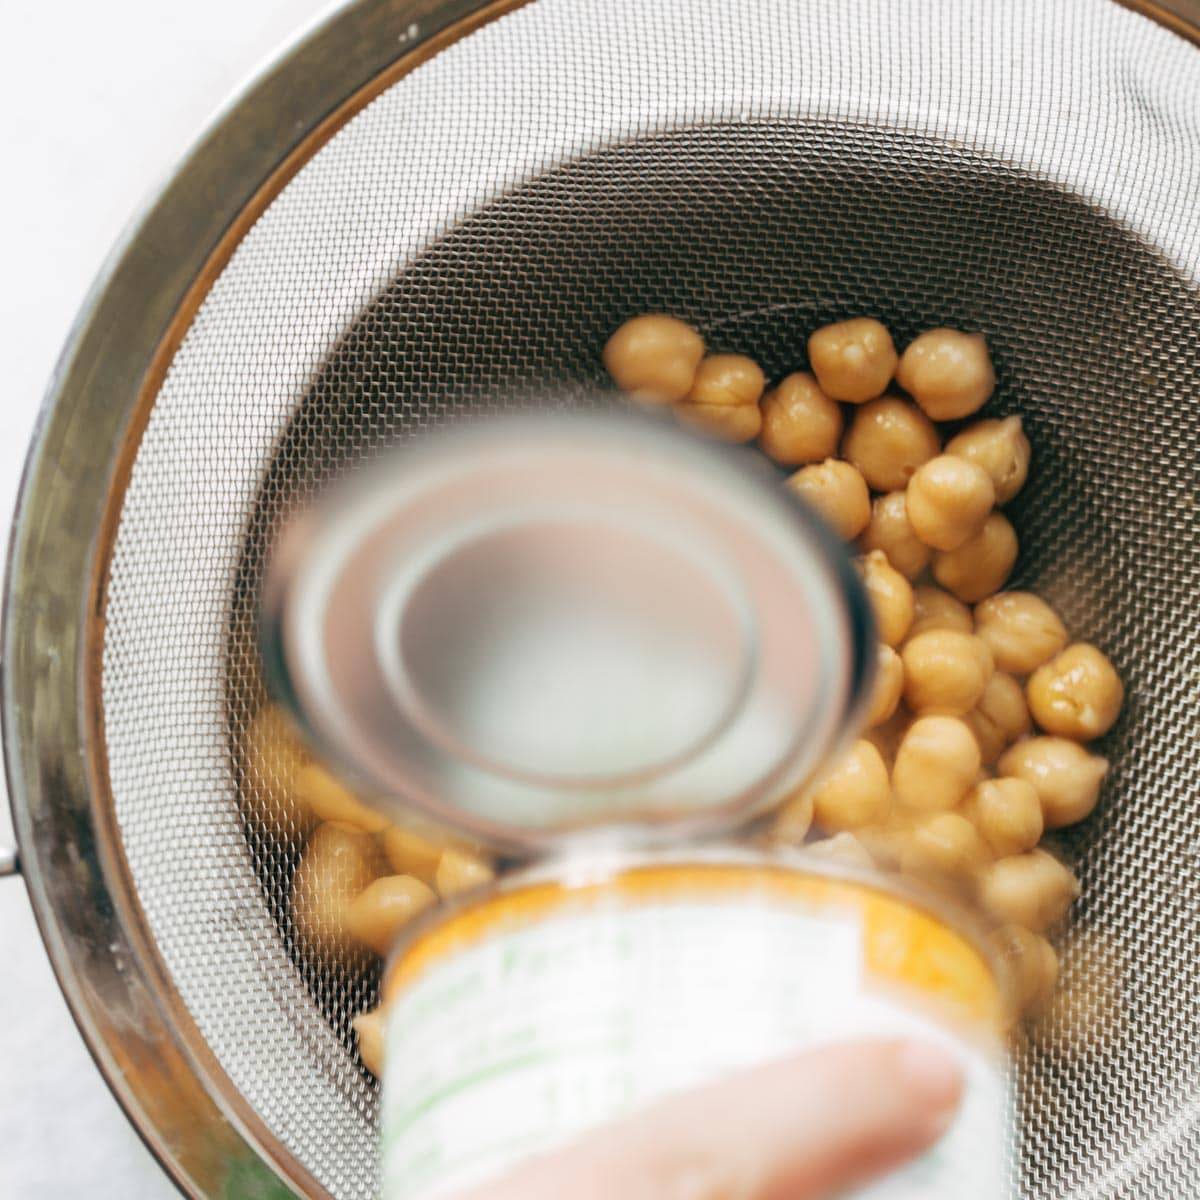 Pouring chickpeas into strainer.